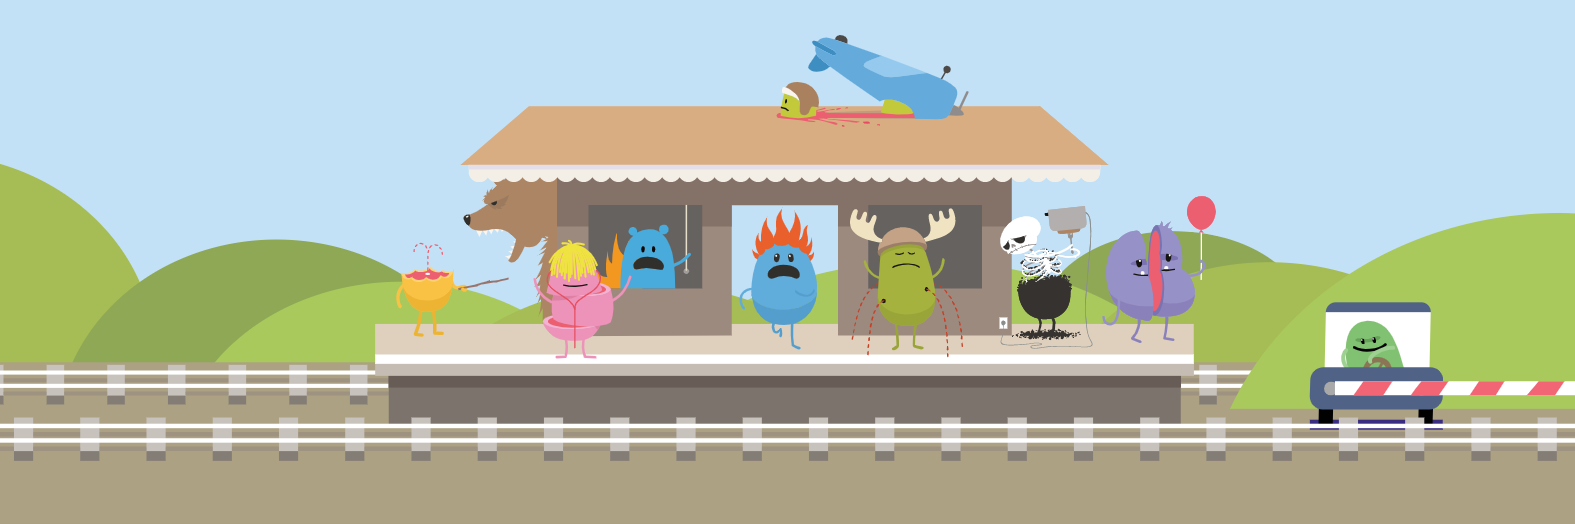 Dumb ways to die: tips and guide